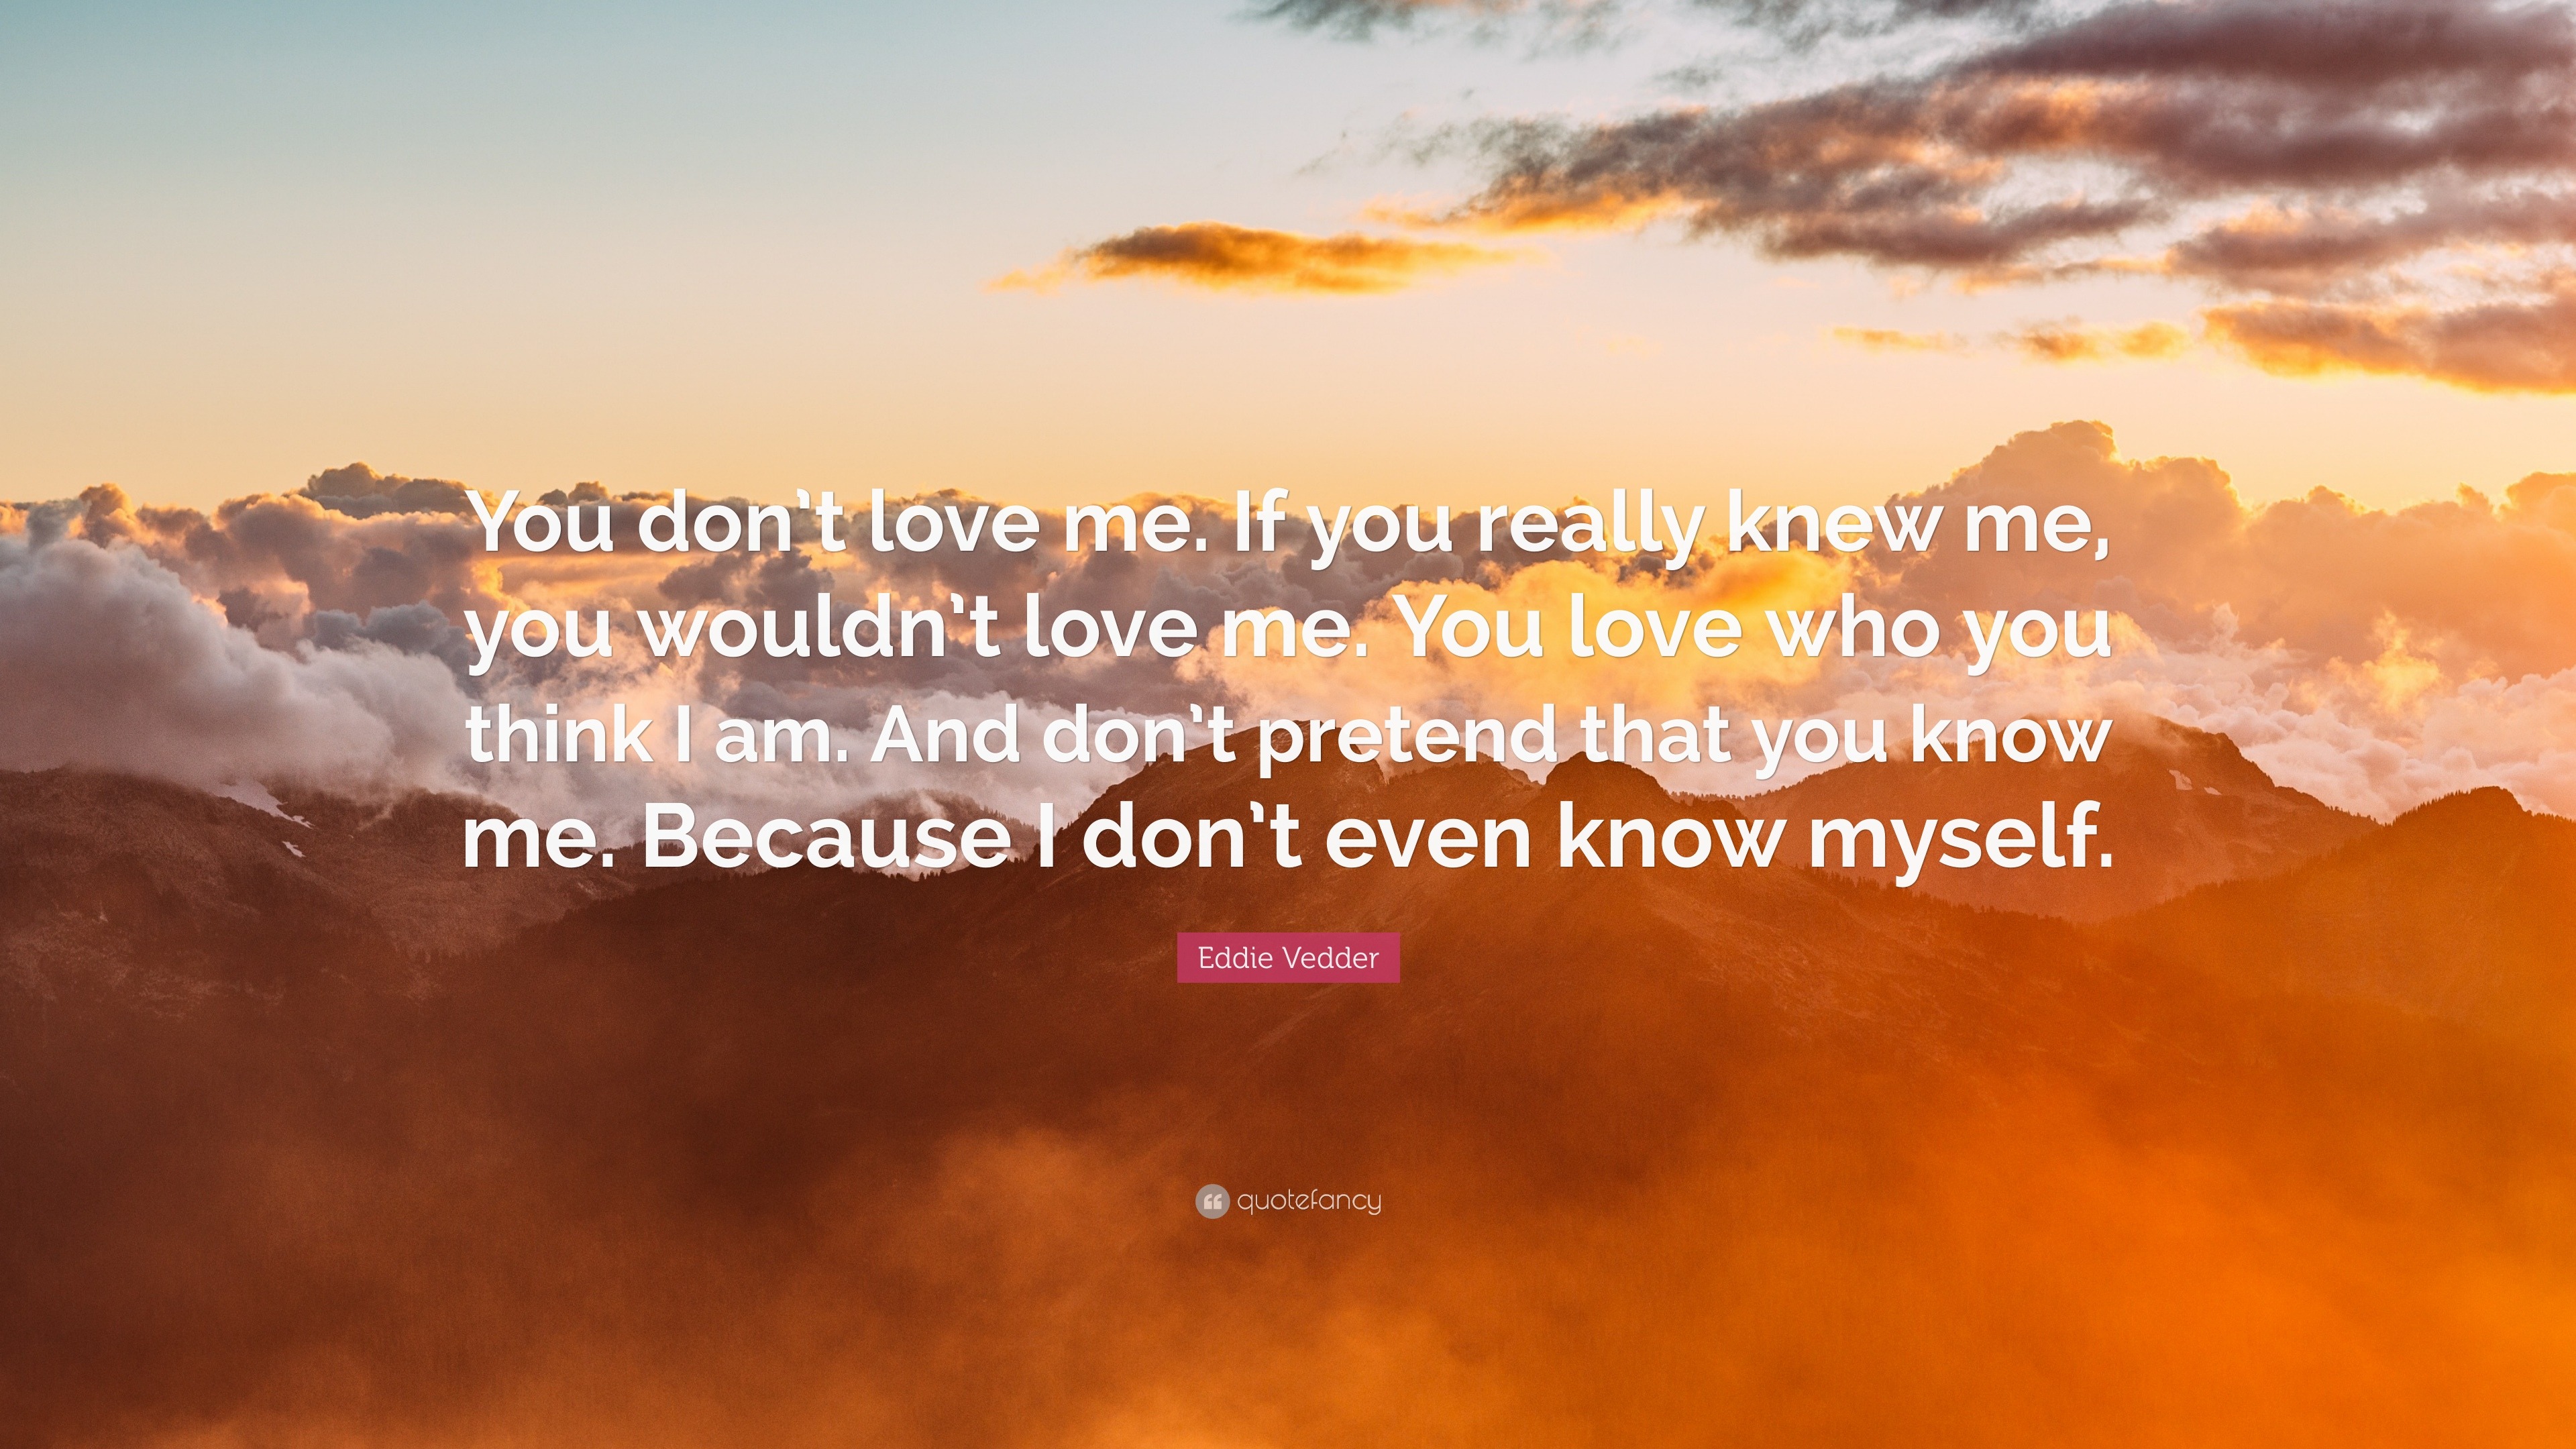 Eddie Vedder Quote: "You don't love me. If you really knew me, you wouldn't love me. You love ...